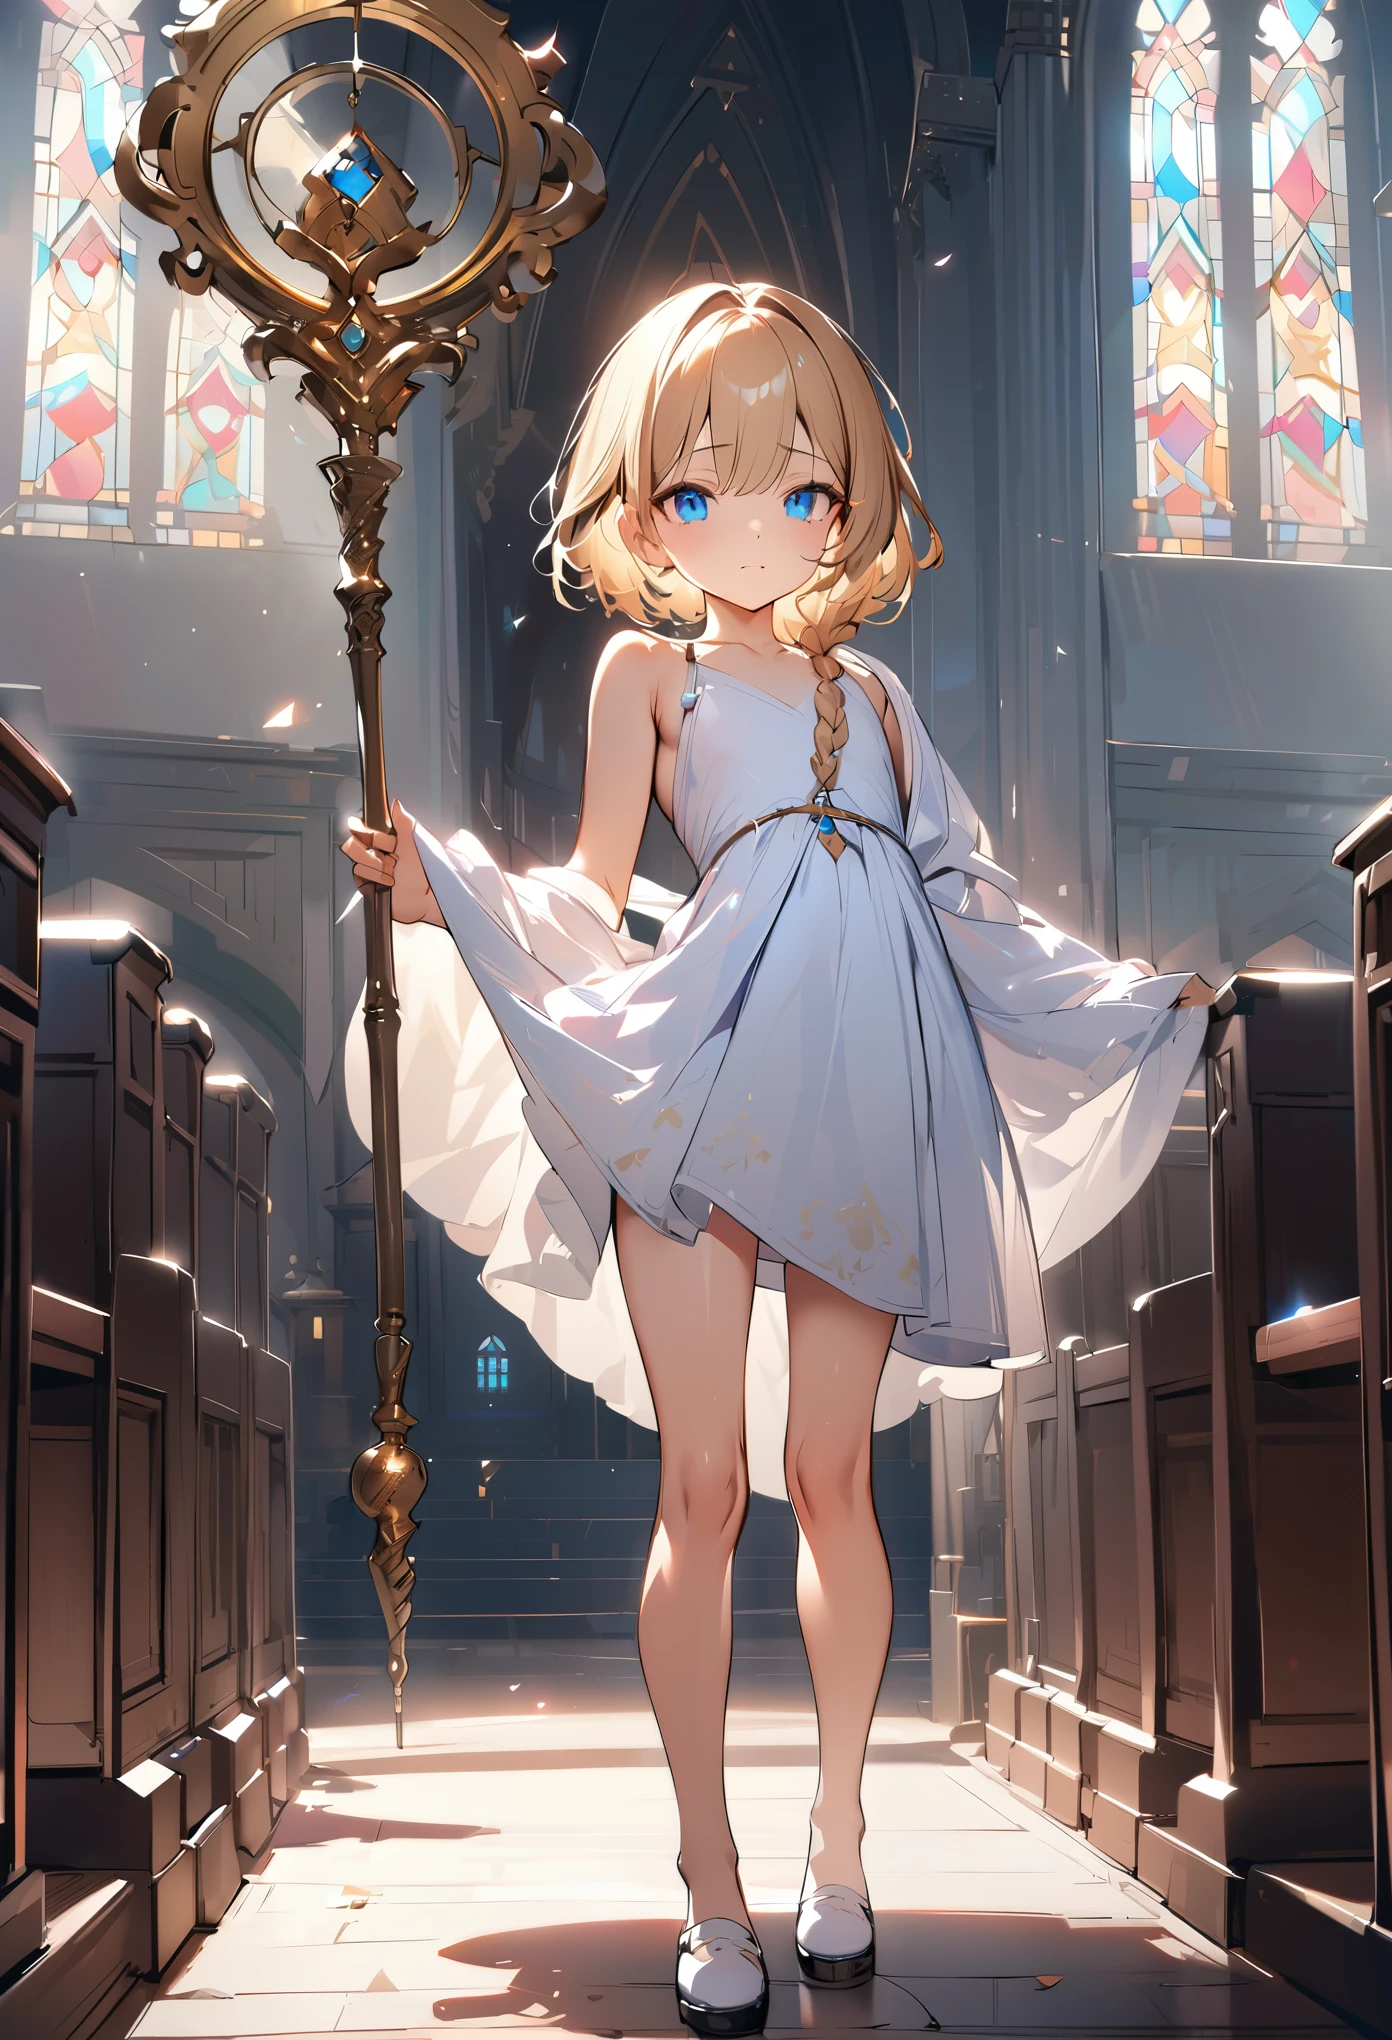 1boy, trap, blonde hair, long single back-length braid, blue eyes, flat chest, somewhat short person, white robes, bare legs, extremely girly boy, clutching golden staff, church background, textured skin, UHD, UHD, UHD, UHD, award winning, high details, incredible high-key lighting and shadows, masterpiece, incredible illustration